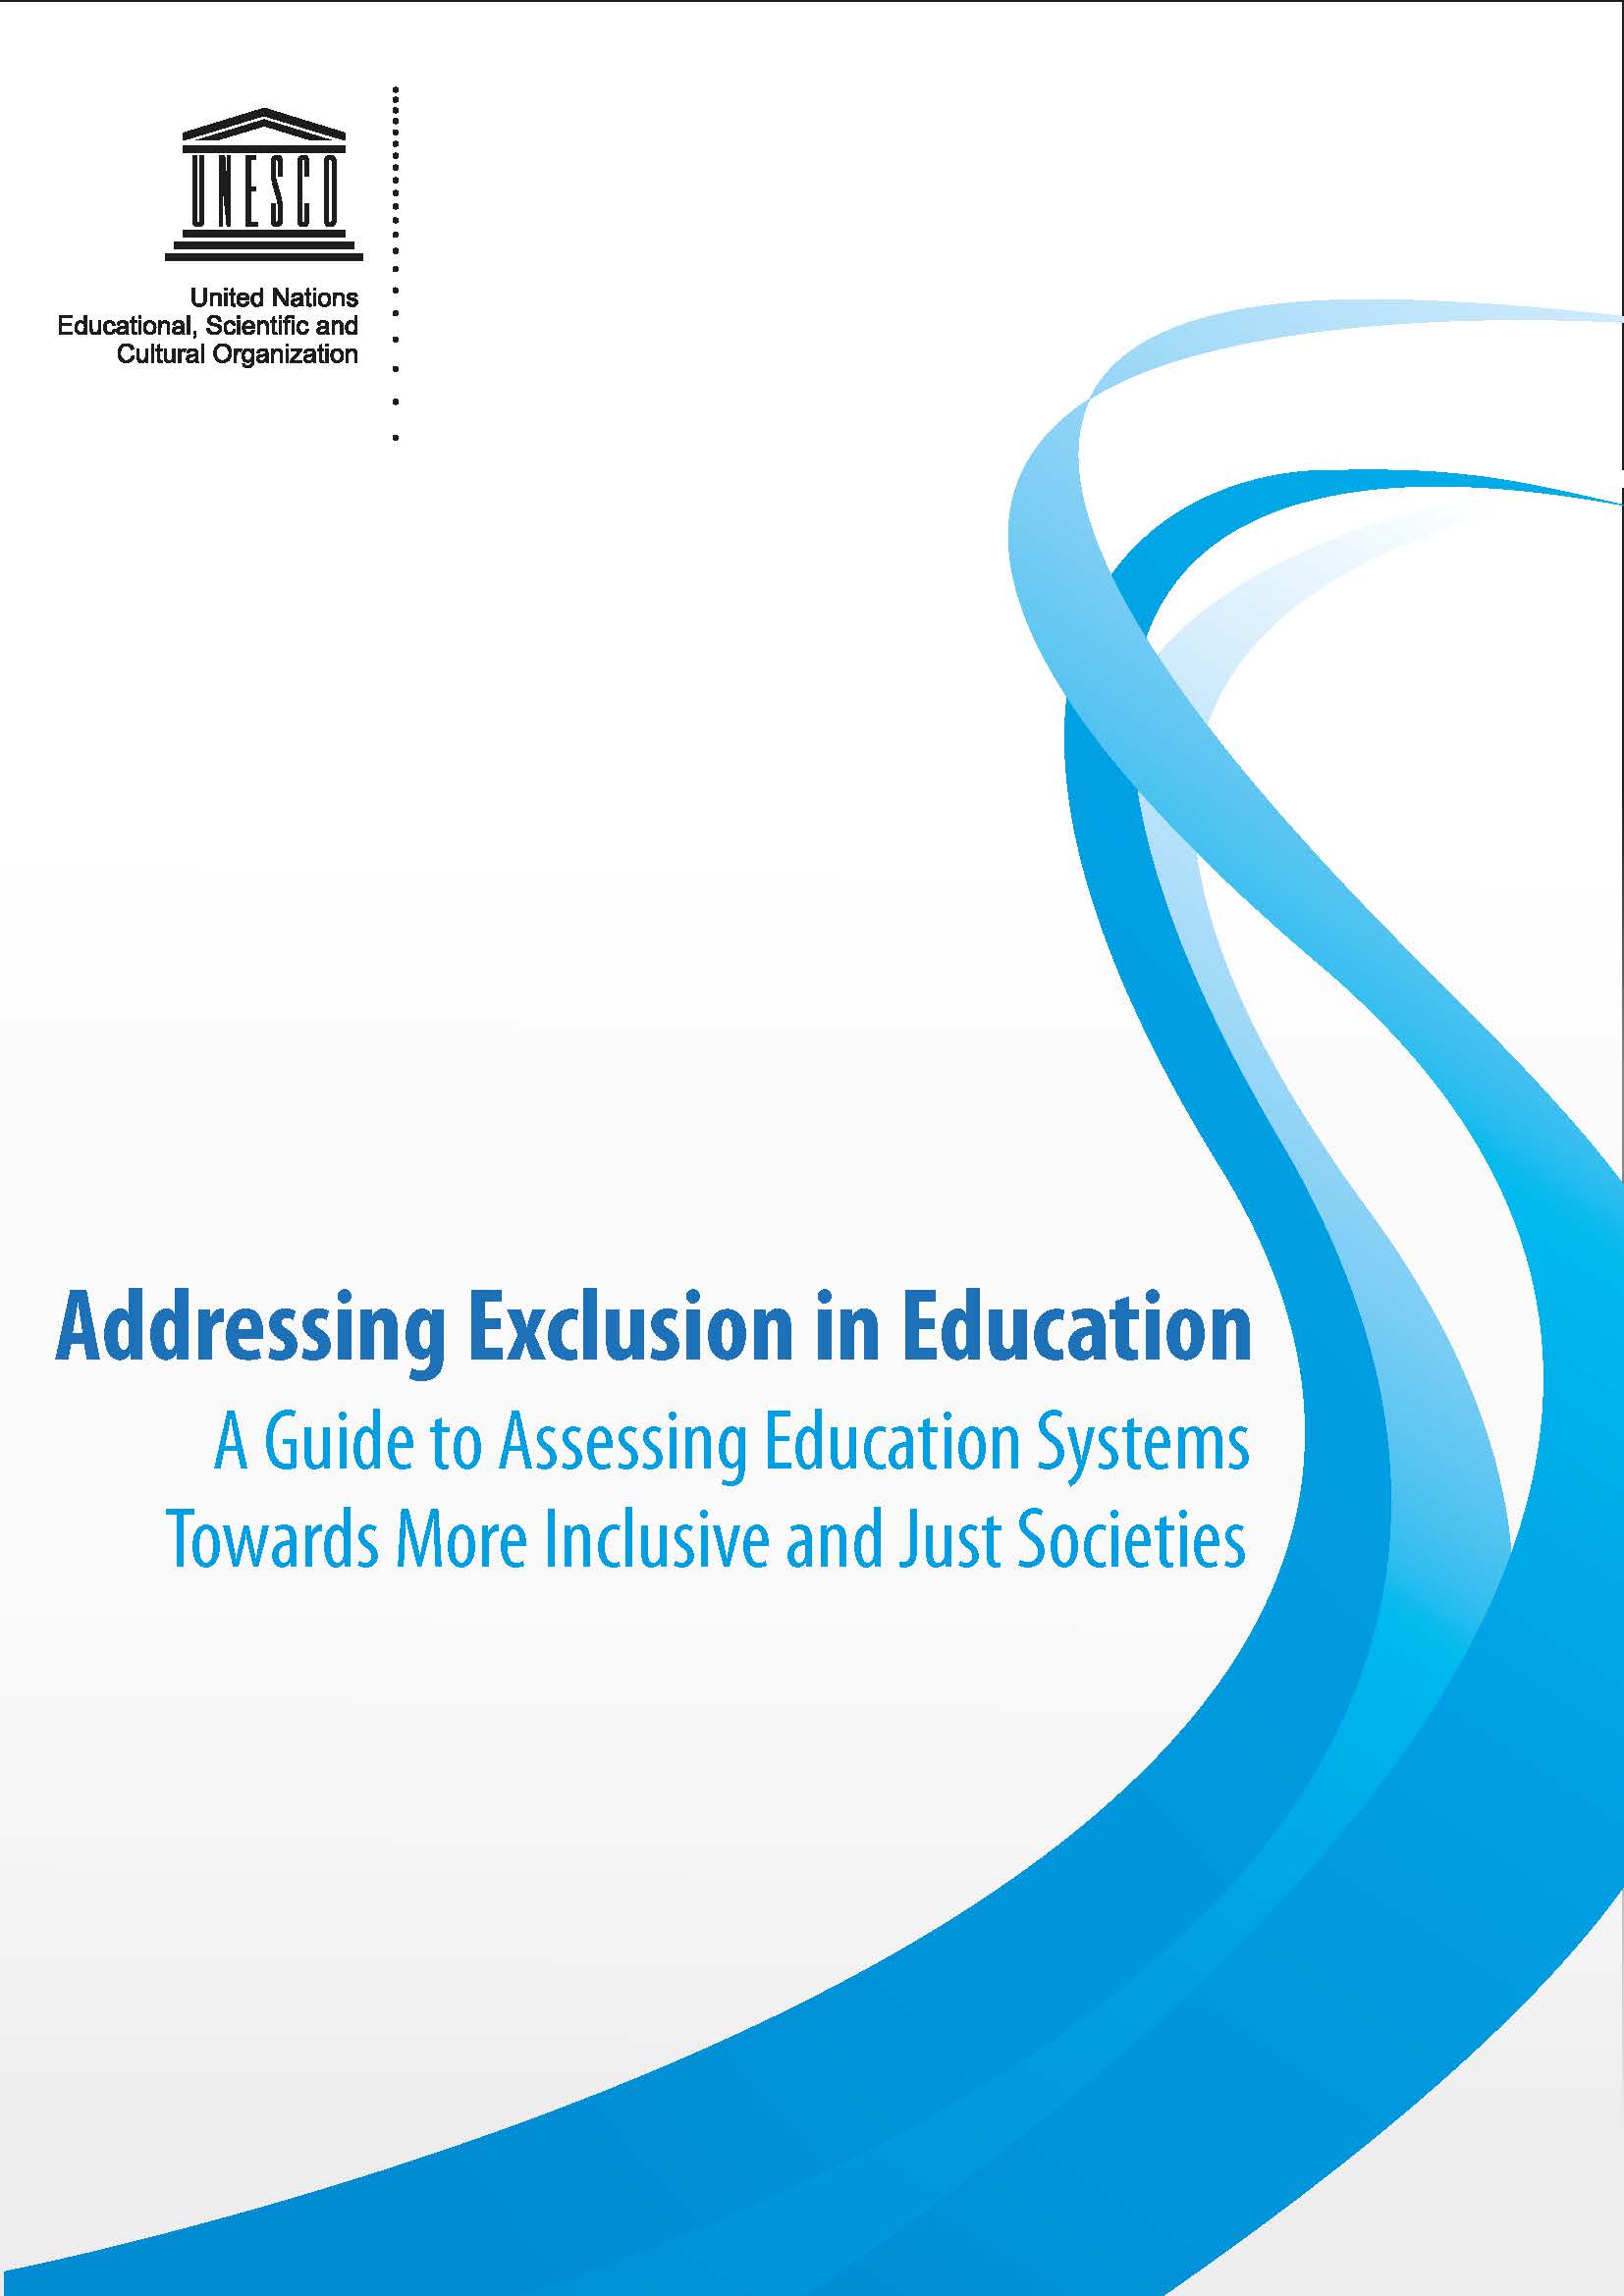 Addressing exclusion in education